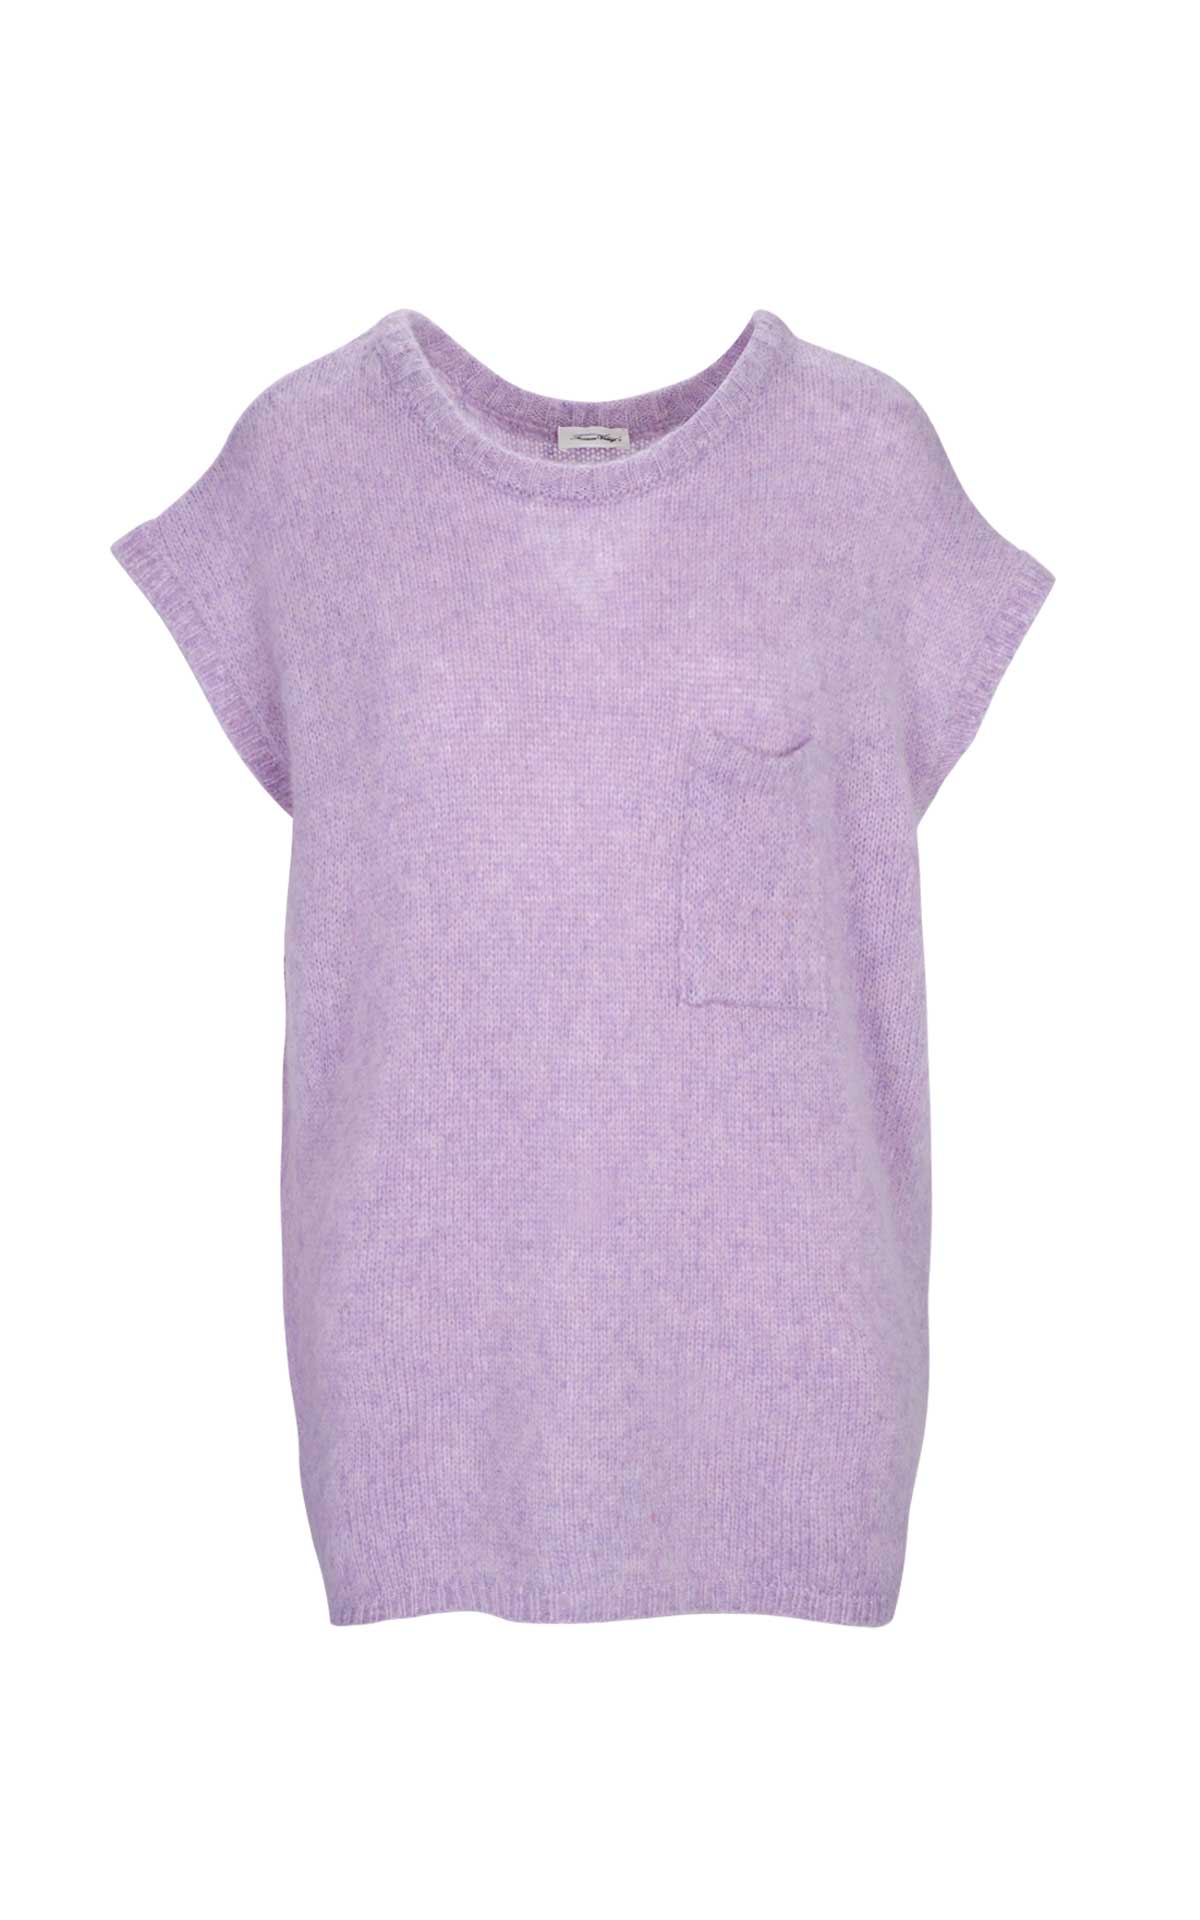 Lilac knitted short-sleeved sweater American VIntage